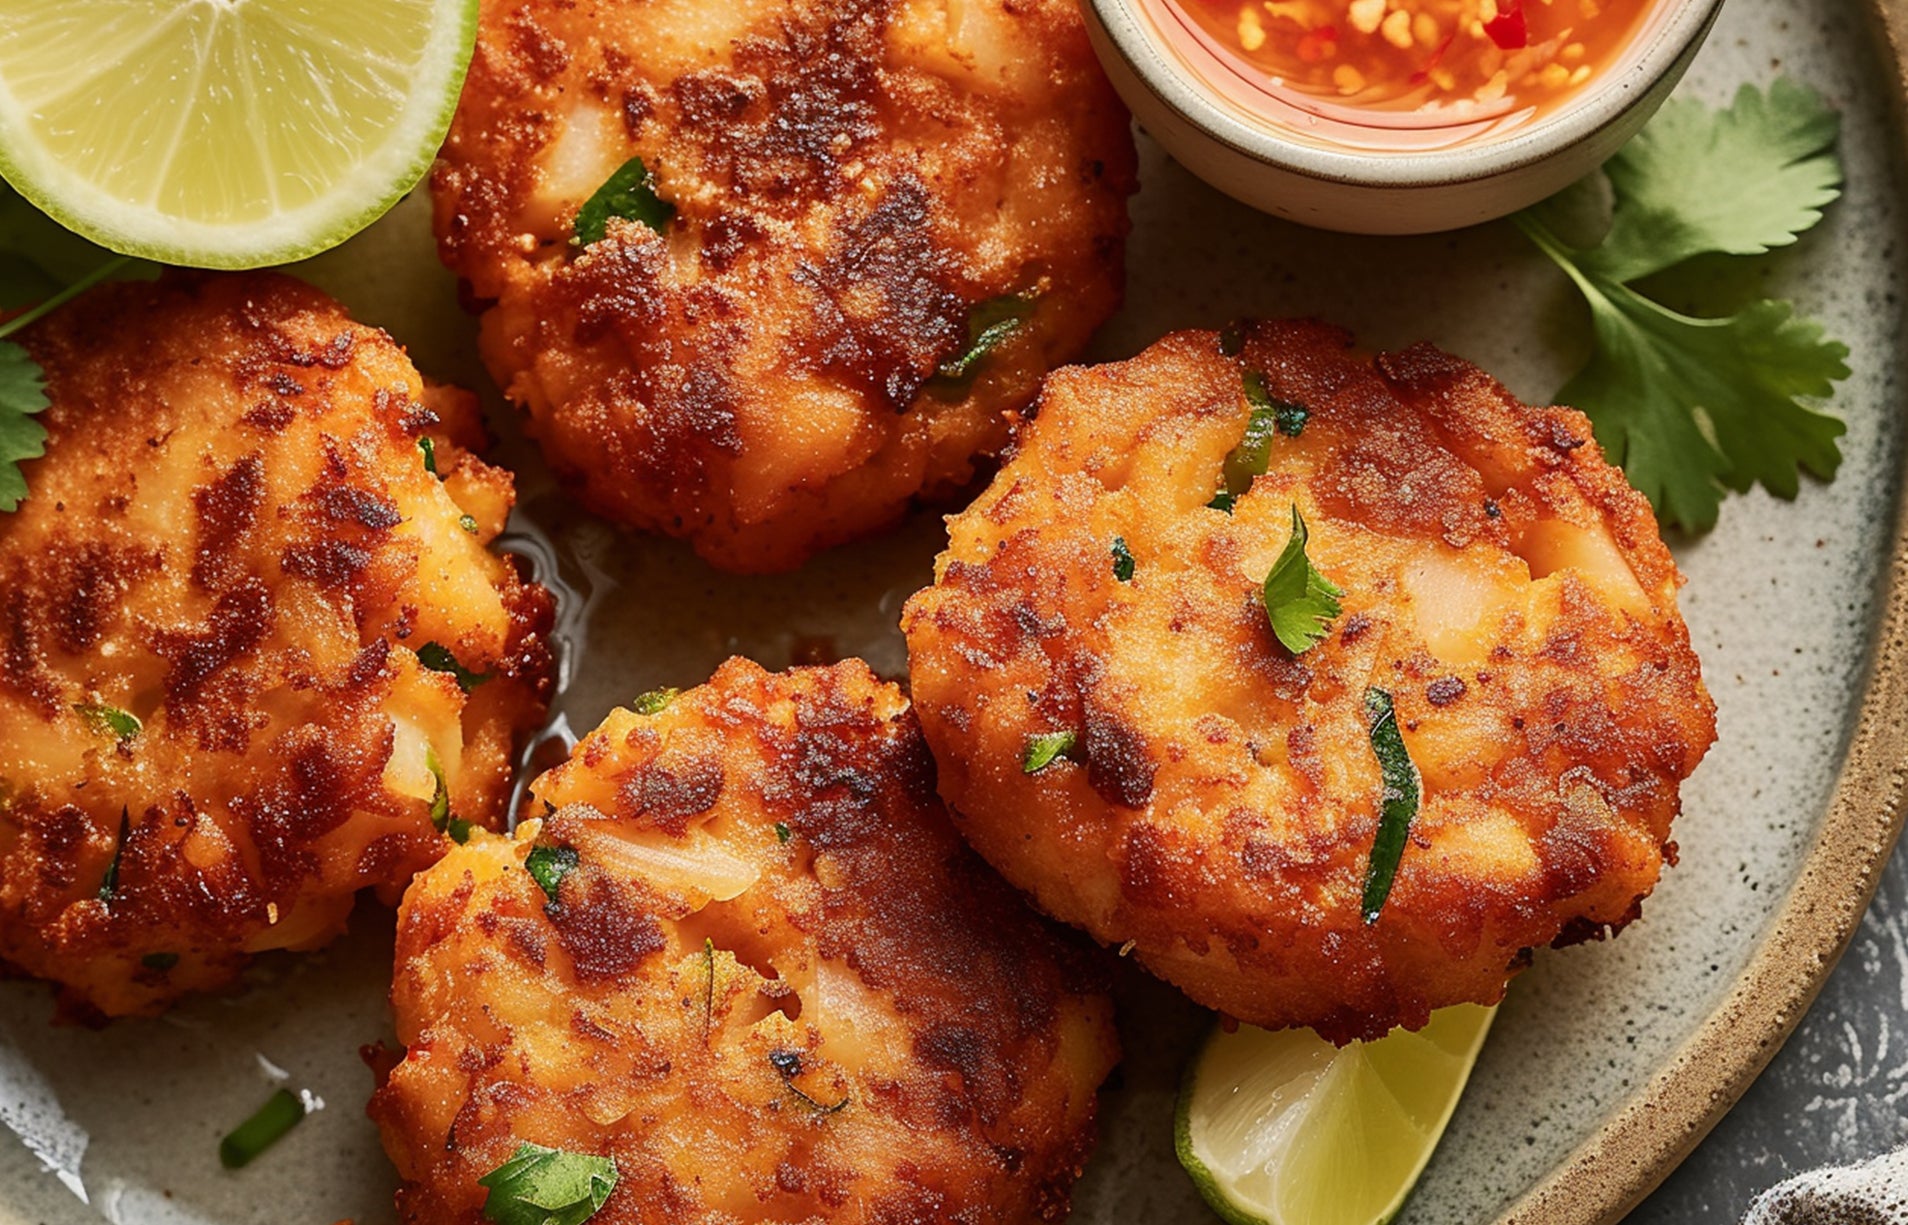 Crispy air-fried fish patties with lime and dipping sauce by Ruokala